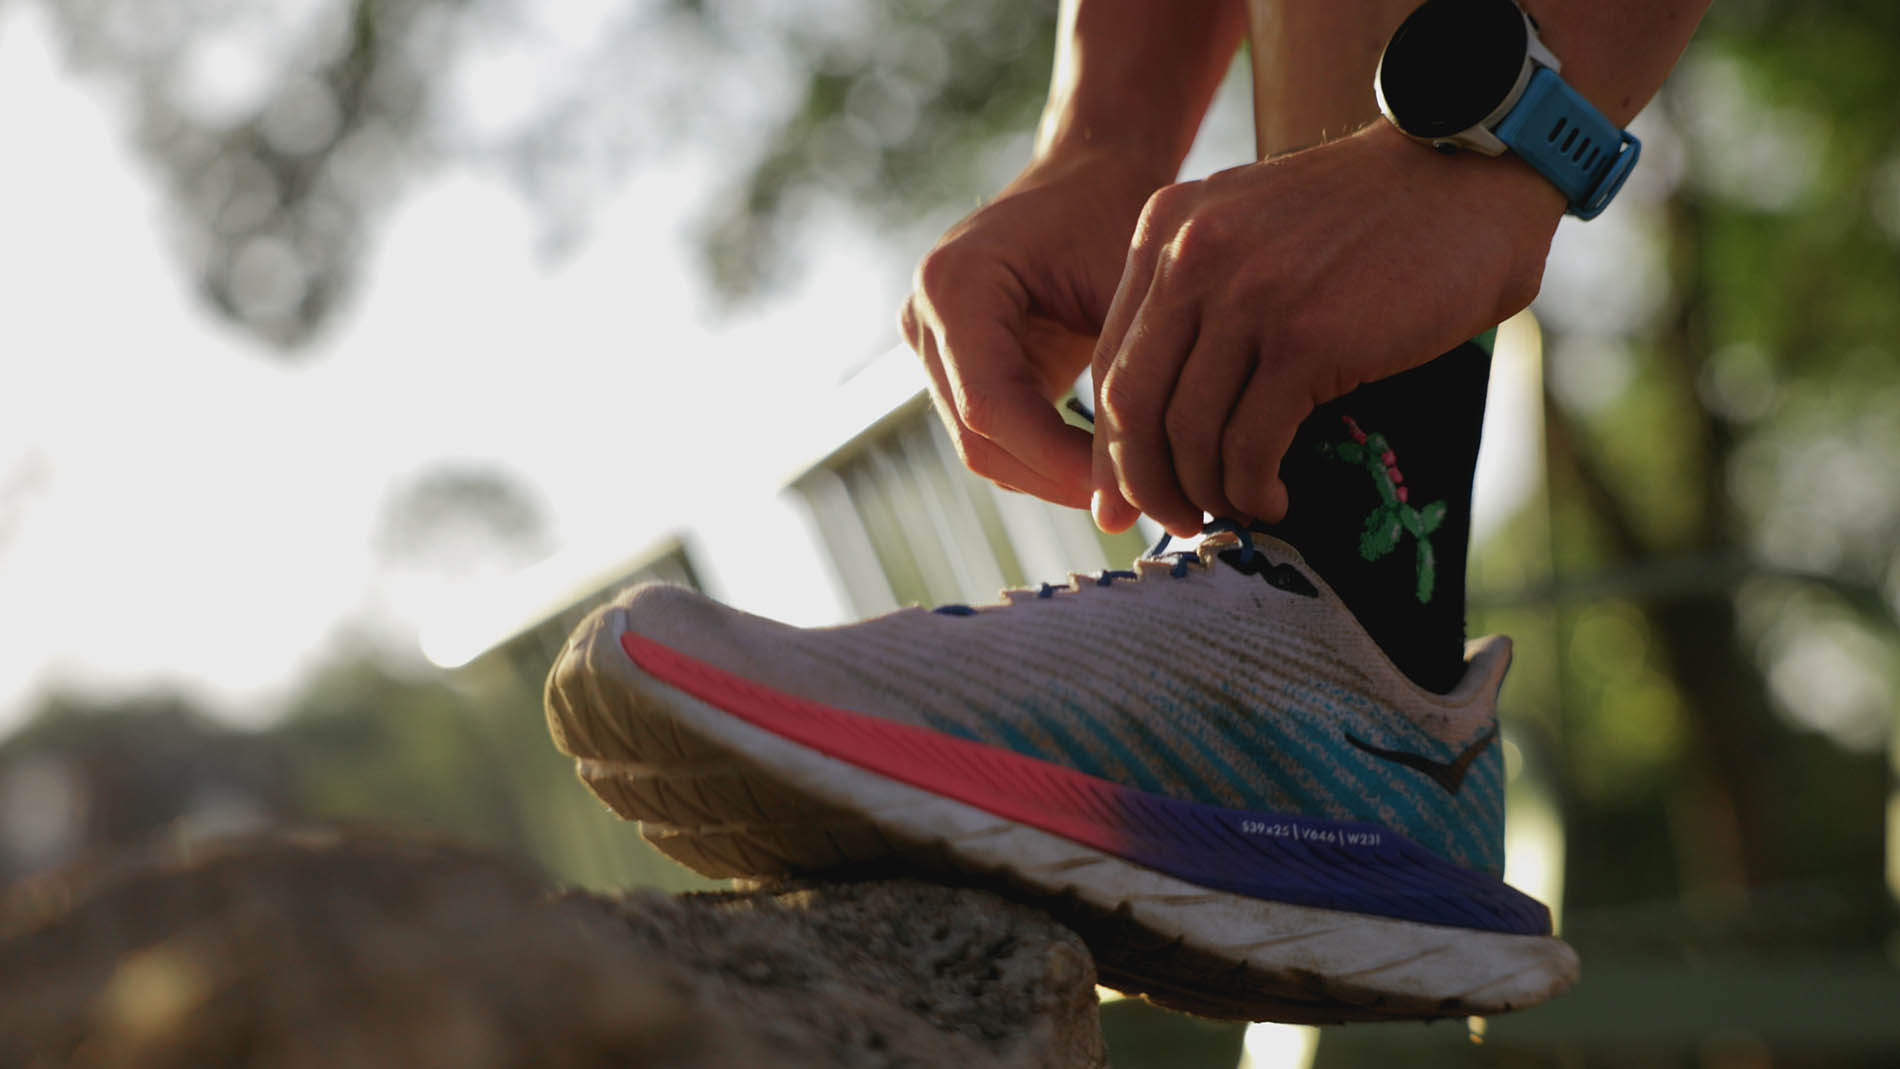 A close-up of a person tying the laces of a colorful running shoe outdoors, with a focus on their hands and the shoe. A fitness watch is visible on the wrist, indicating attention to physical